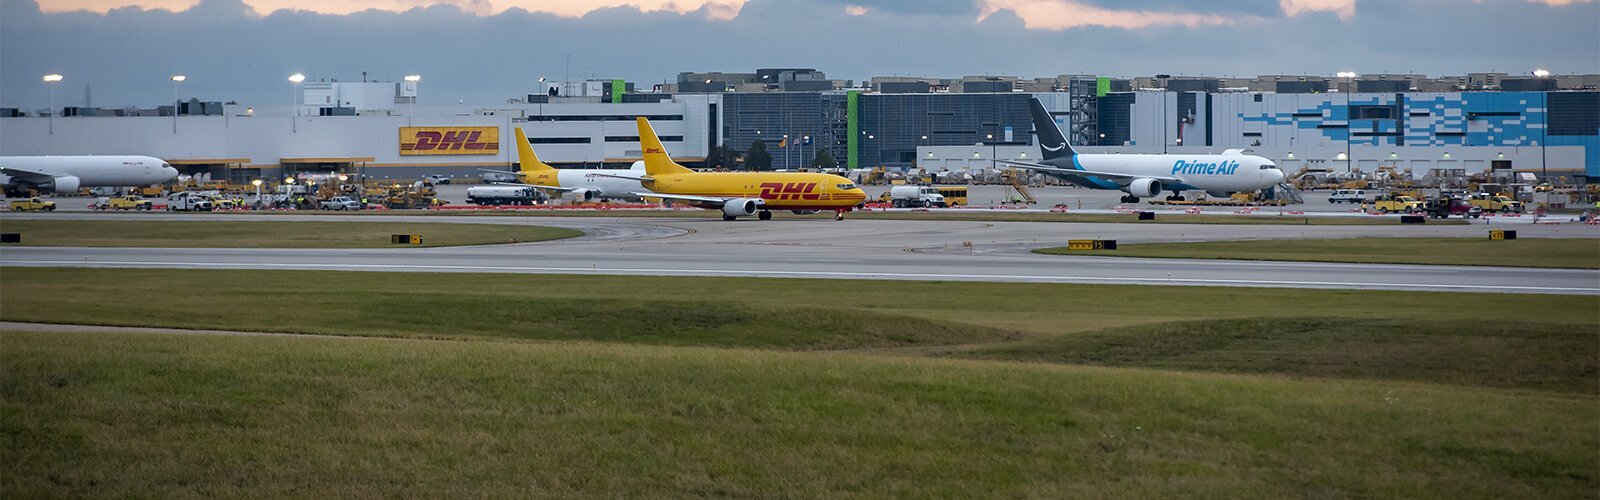 DHL established its international Americas Hub at CVG in 2009 and has invested hundreds of millions to expand the operations, including building a new ramp for additional warehouse space, more aircraft gates to accommodate route expansions, and more.